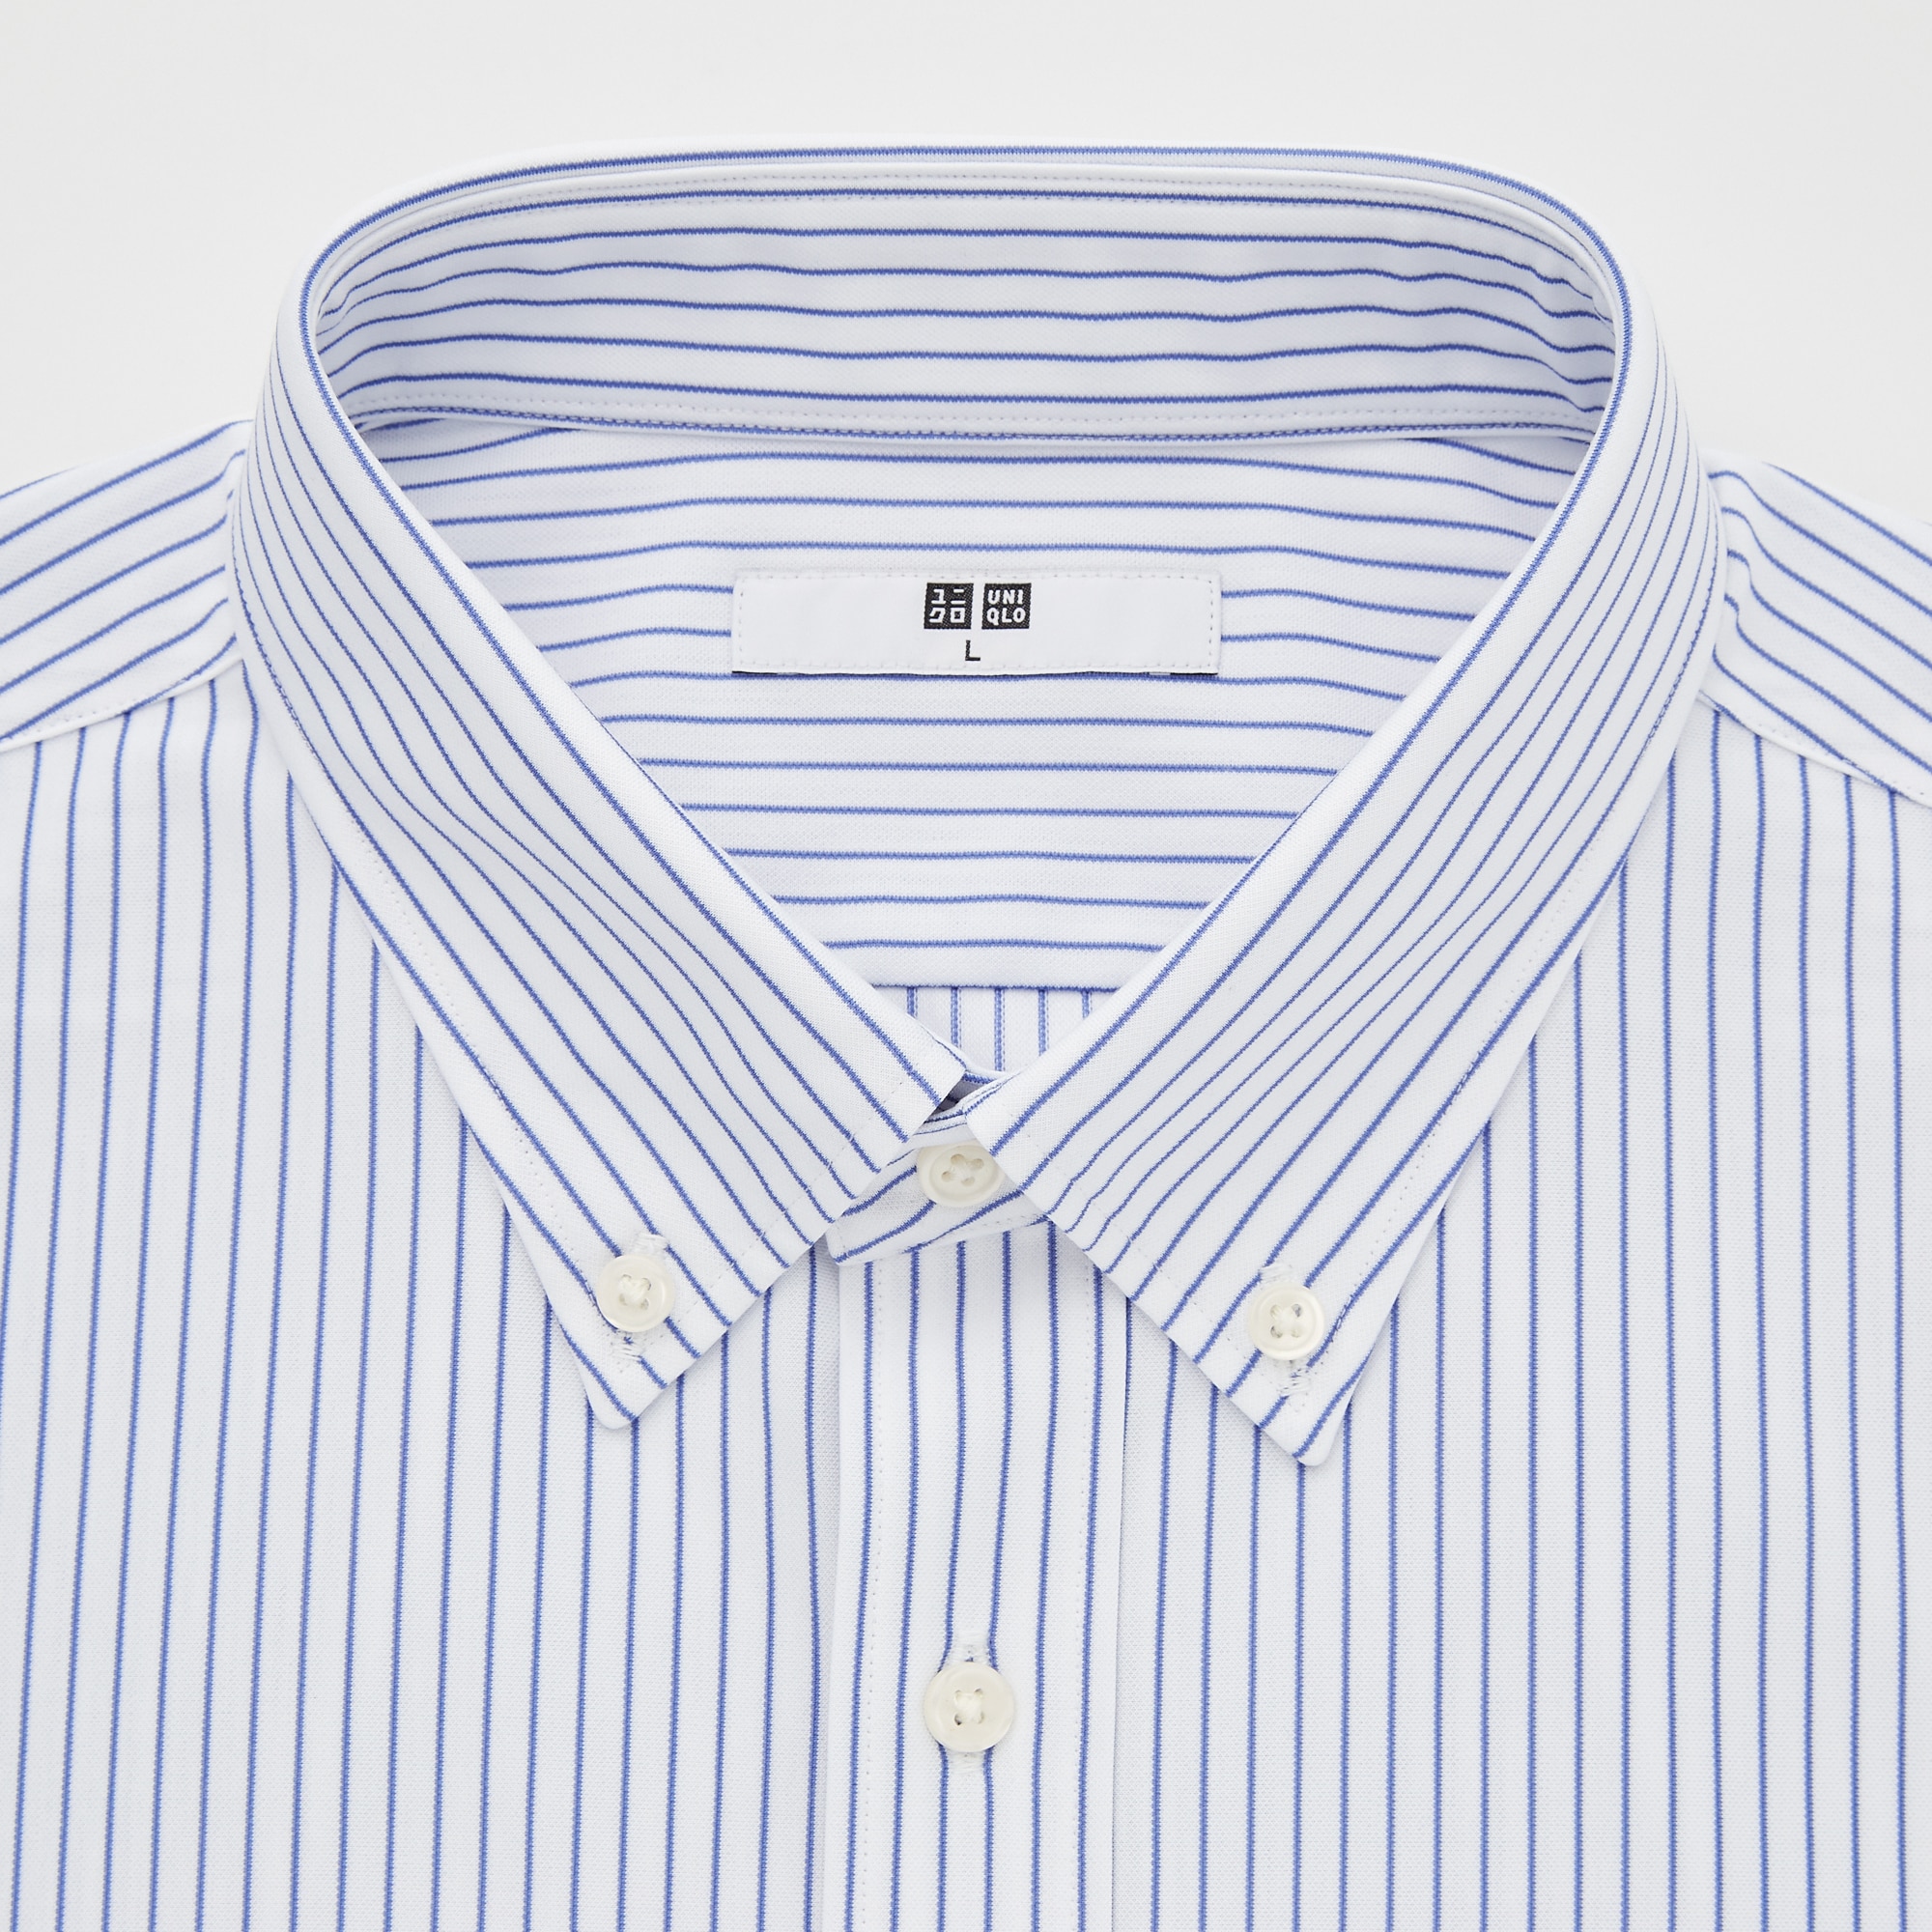 UNIQLO Philippines on Twitter Get the ultimate business shirt minus the  time needed for care With updated wrinkleresistant processing our Mens  Super NonIron SlimFit Long Sleeve Shirt holds up even after washing